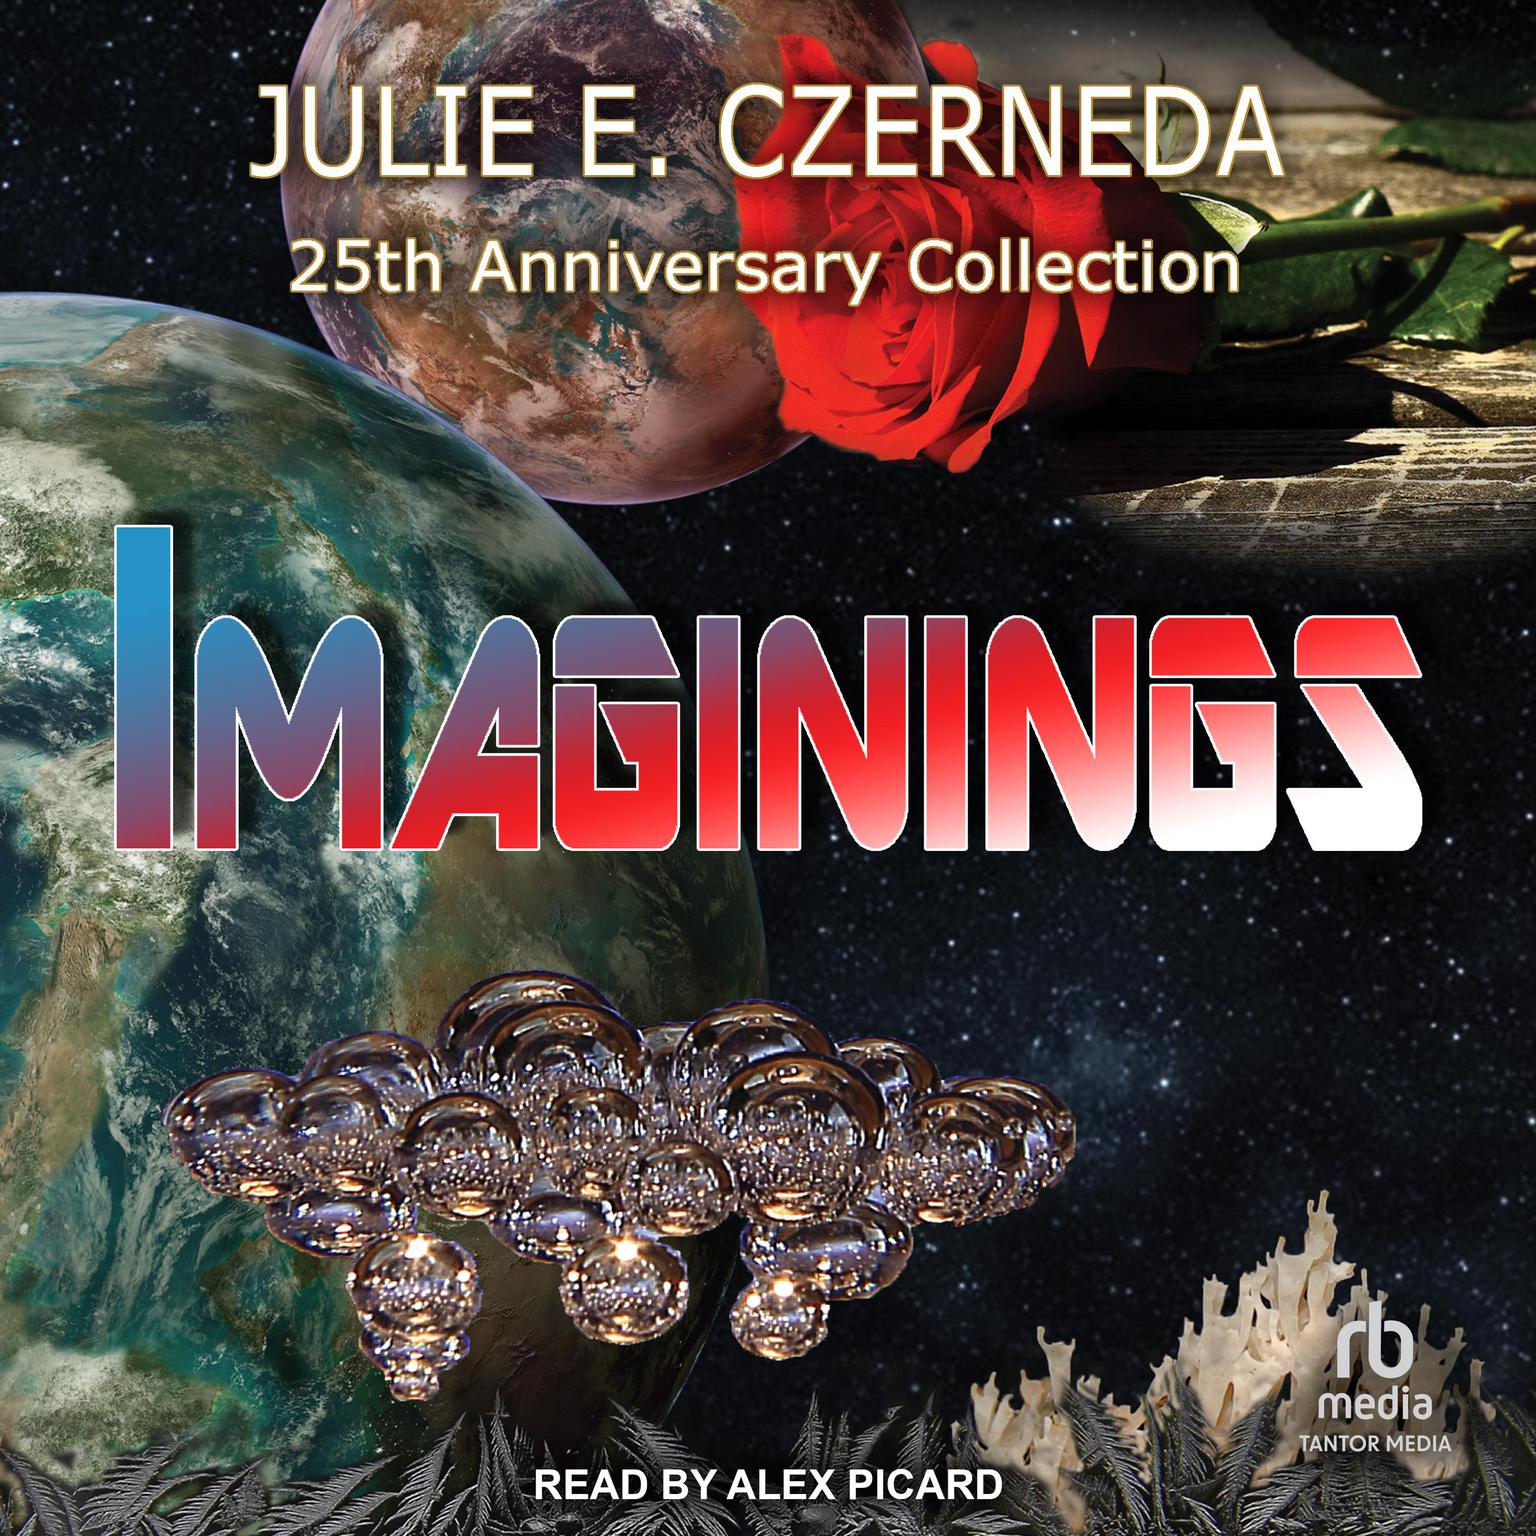 Imaginings: 25th Anniversary Collection Audiobook, by Julie E. Czerneda